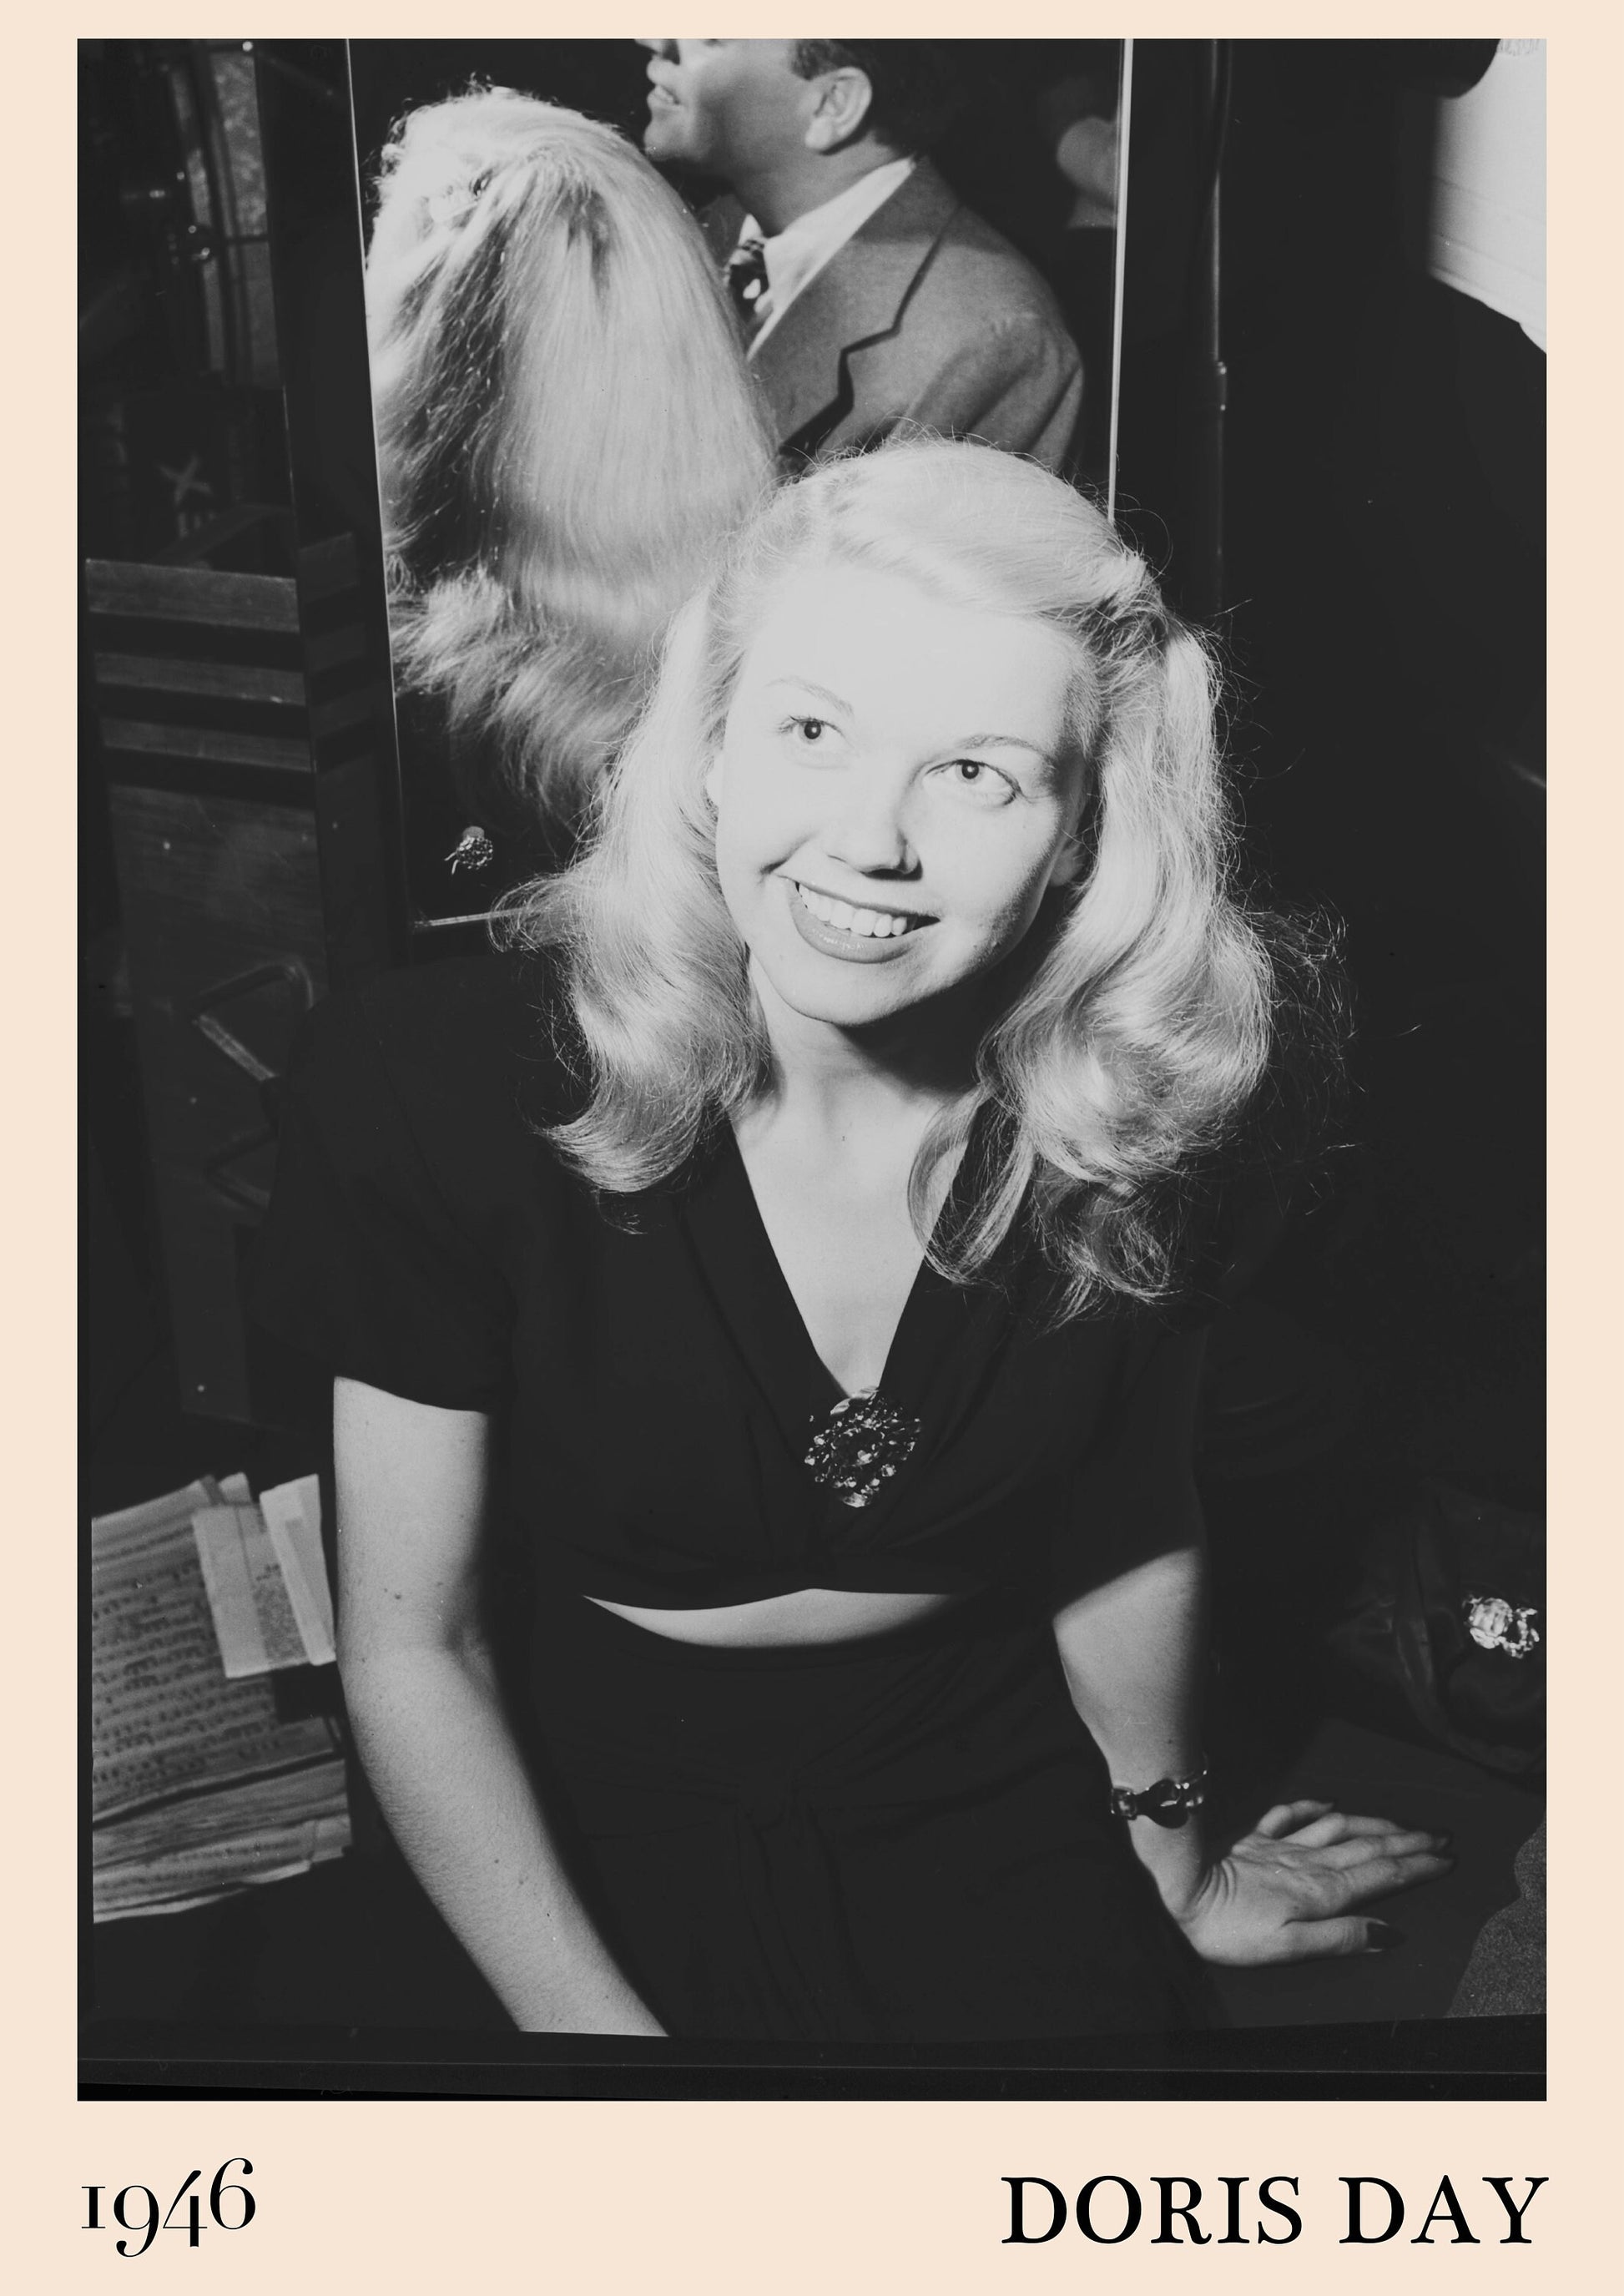 1946 photograph of  Doris Day. Transformed into a cool jazz poster